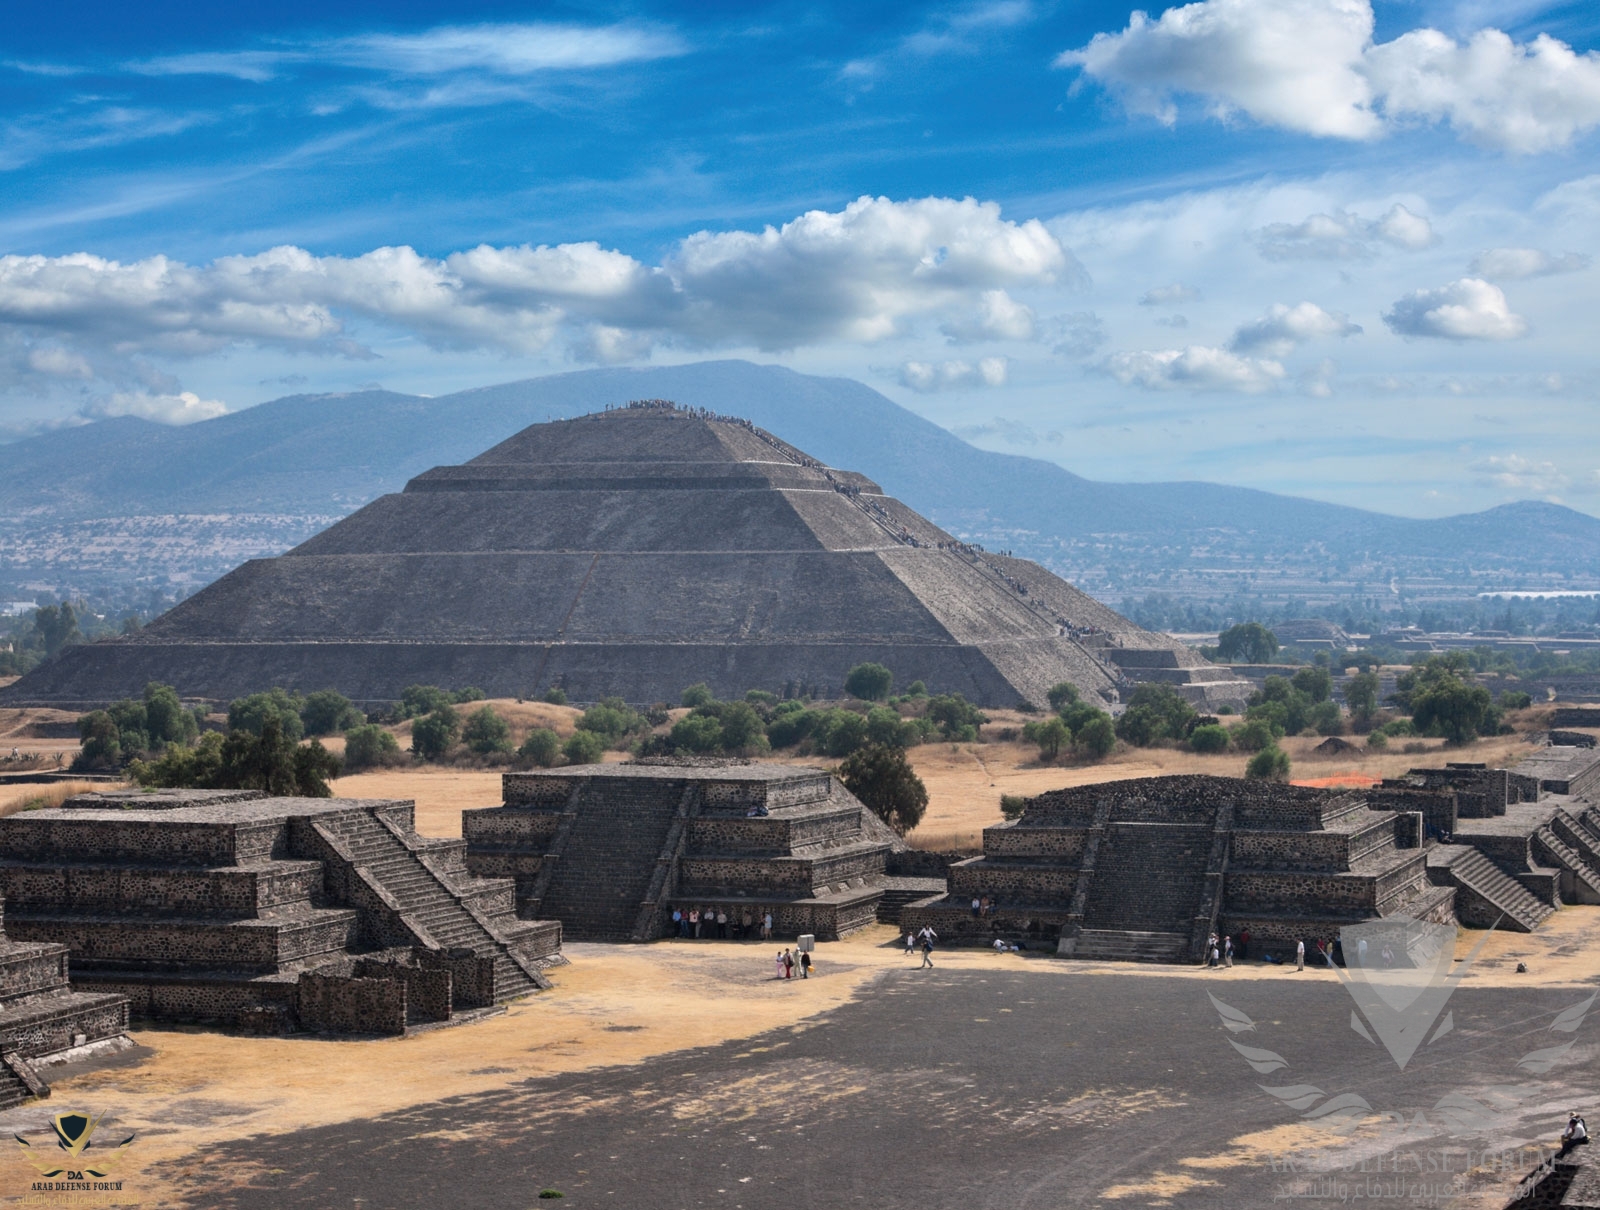 Pyramid-of-the-Sun-city-Mexico-Teotihuacan.jpg